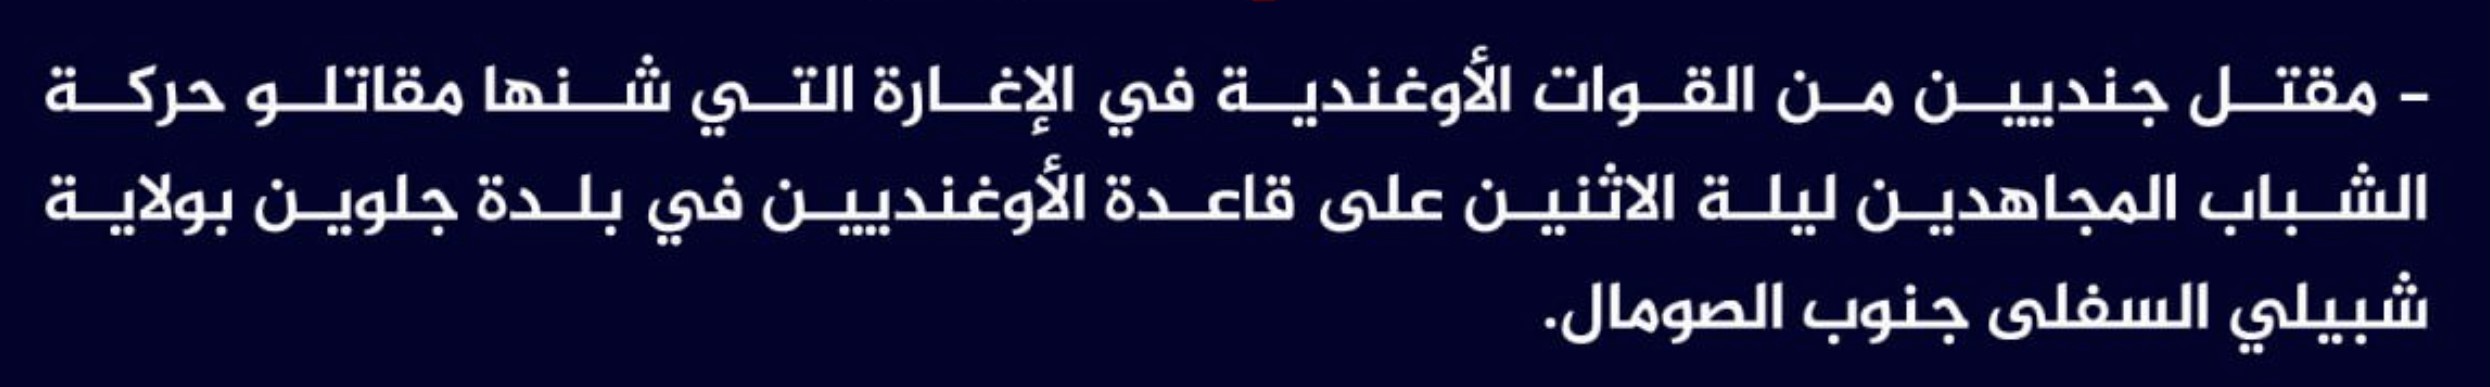 (Claim) al-Shabaab Killed Two Ugandan Soldiers in an Attack on a Military Base in Golweyn Town, Lower Shabelle State, Southern Somalia - 13 June 2023